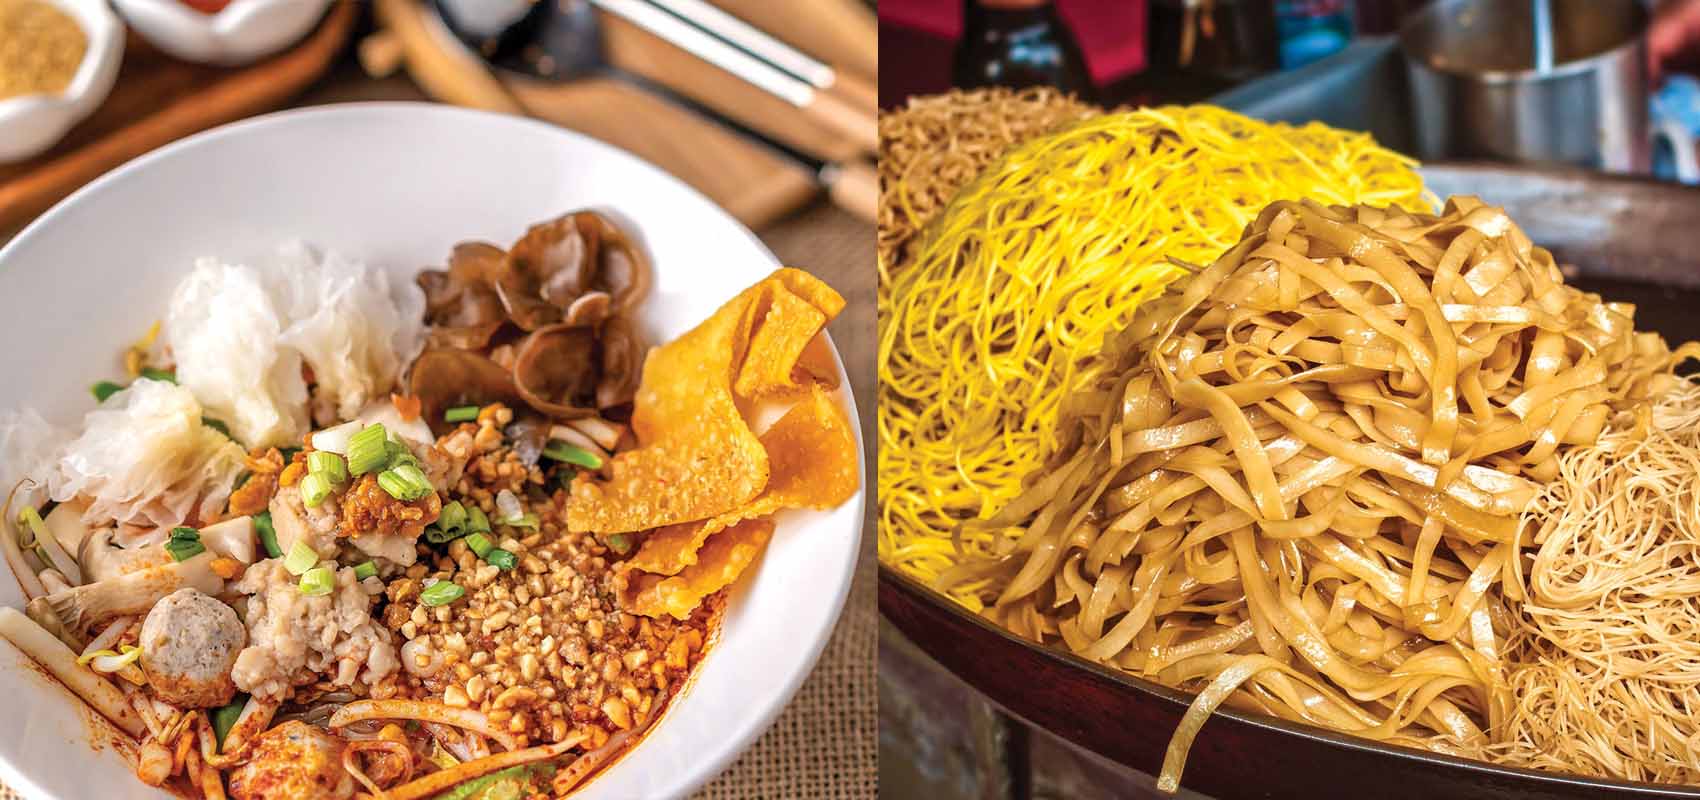 Left: A noodle dish. Right: Four types of noodles side by side